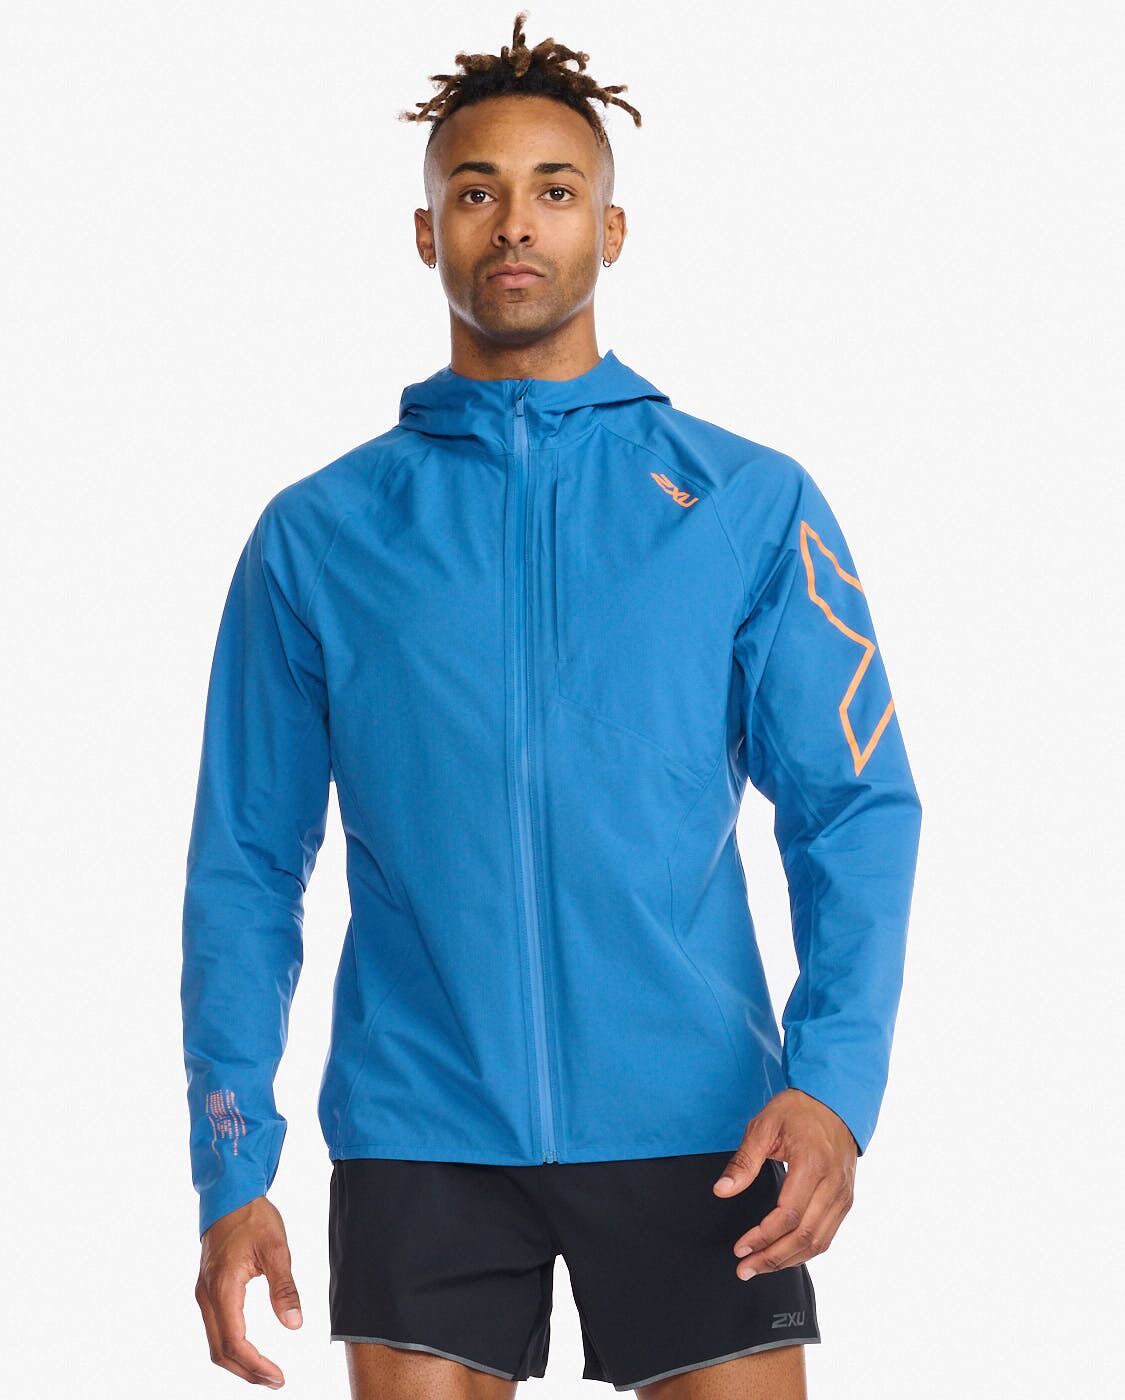 2XU South Africa - Mens Light Speed Wp Jacket - Starling - Starling/Turmeric Reflective